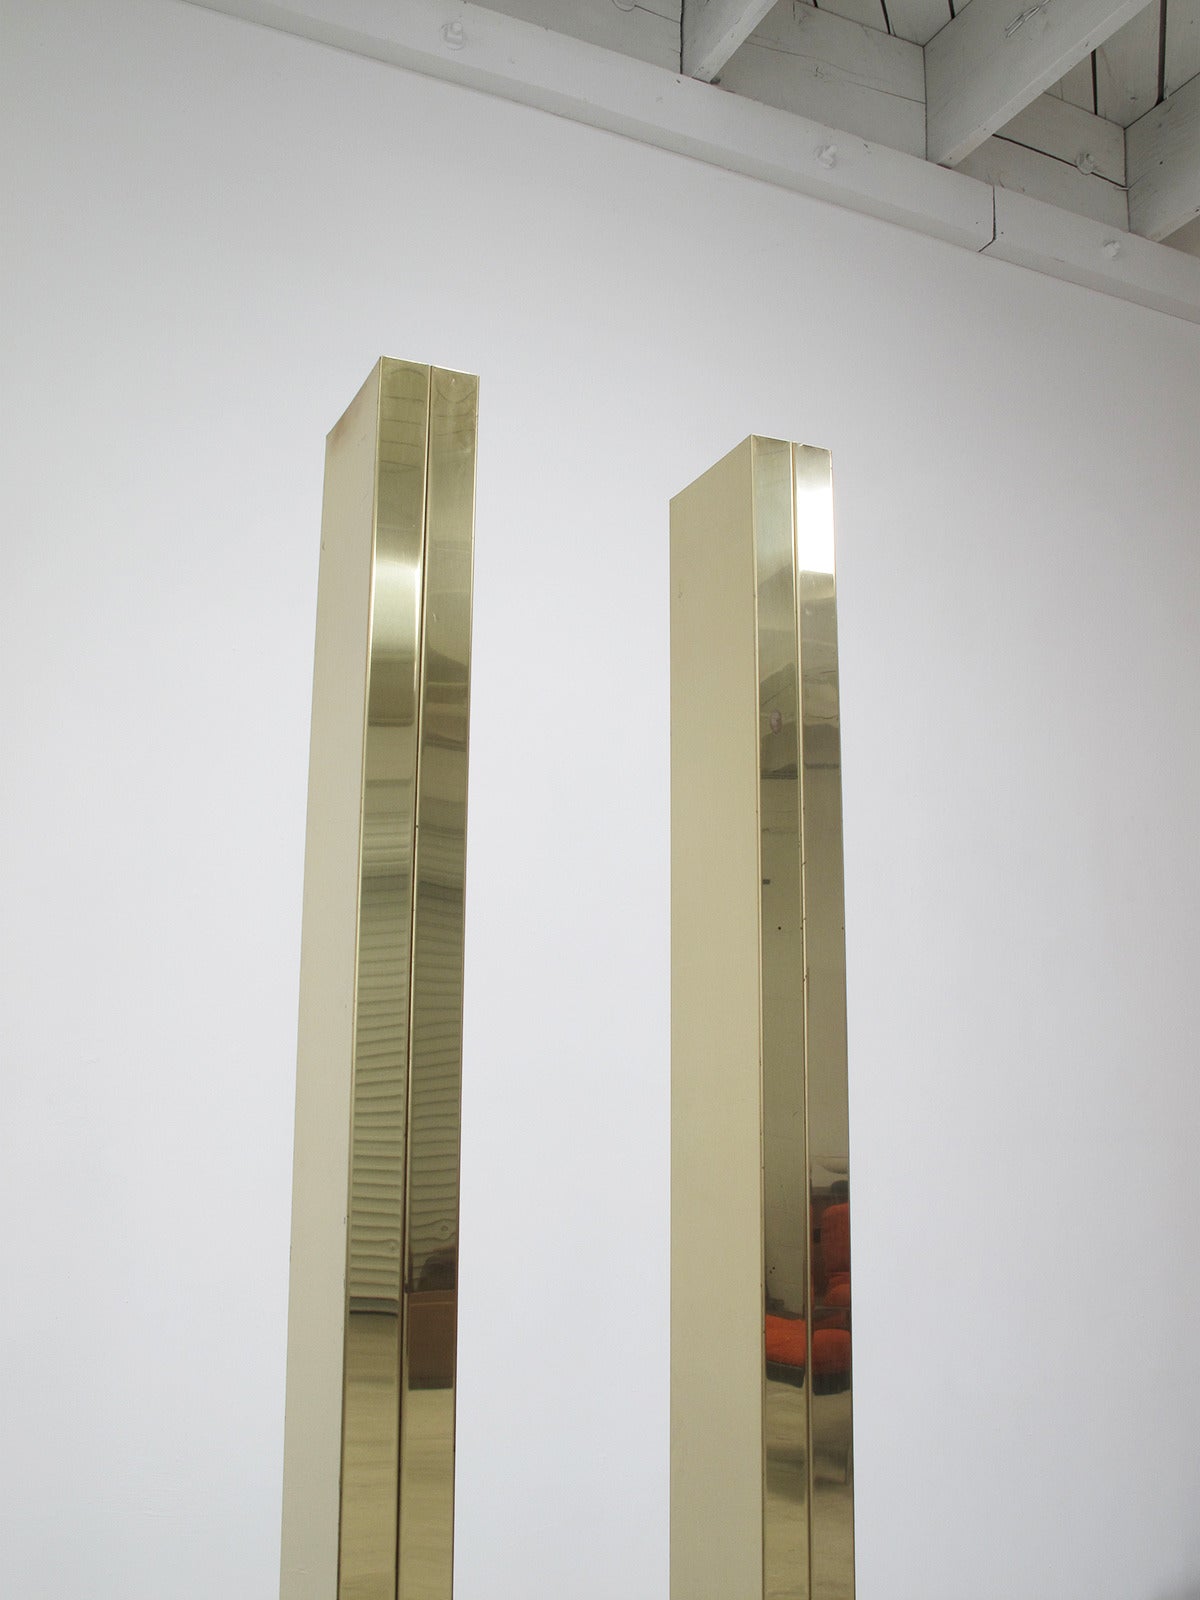 Art Deco Tall Elegant Modern Brass 'Torchiere' Floor Lamps by Casella Lighting, 1970s For Sale